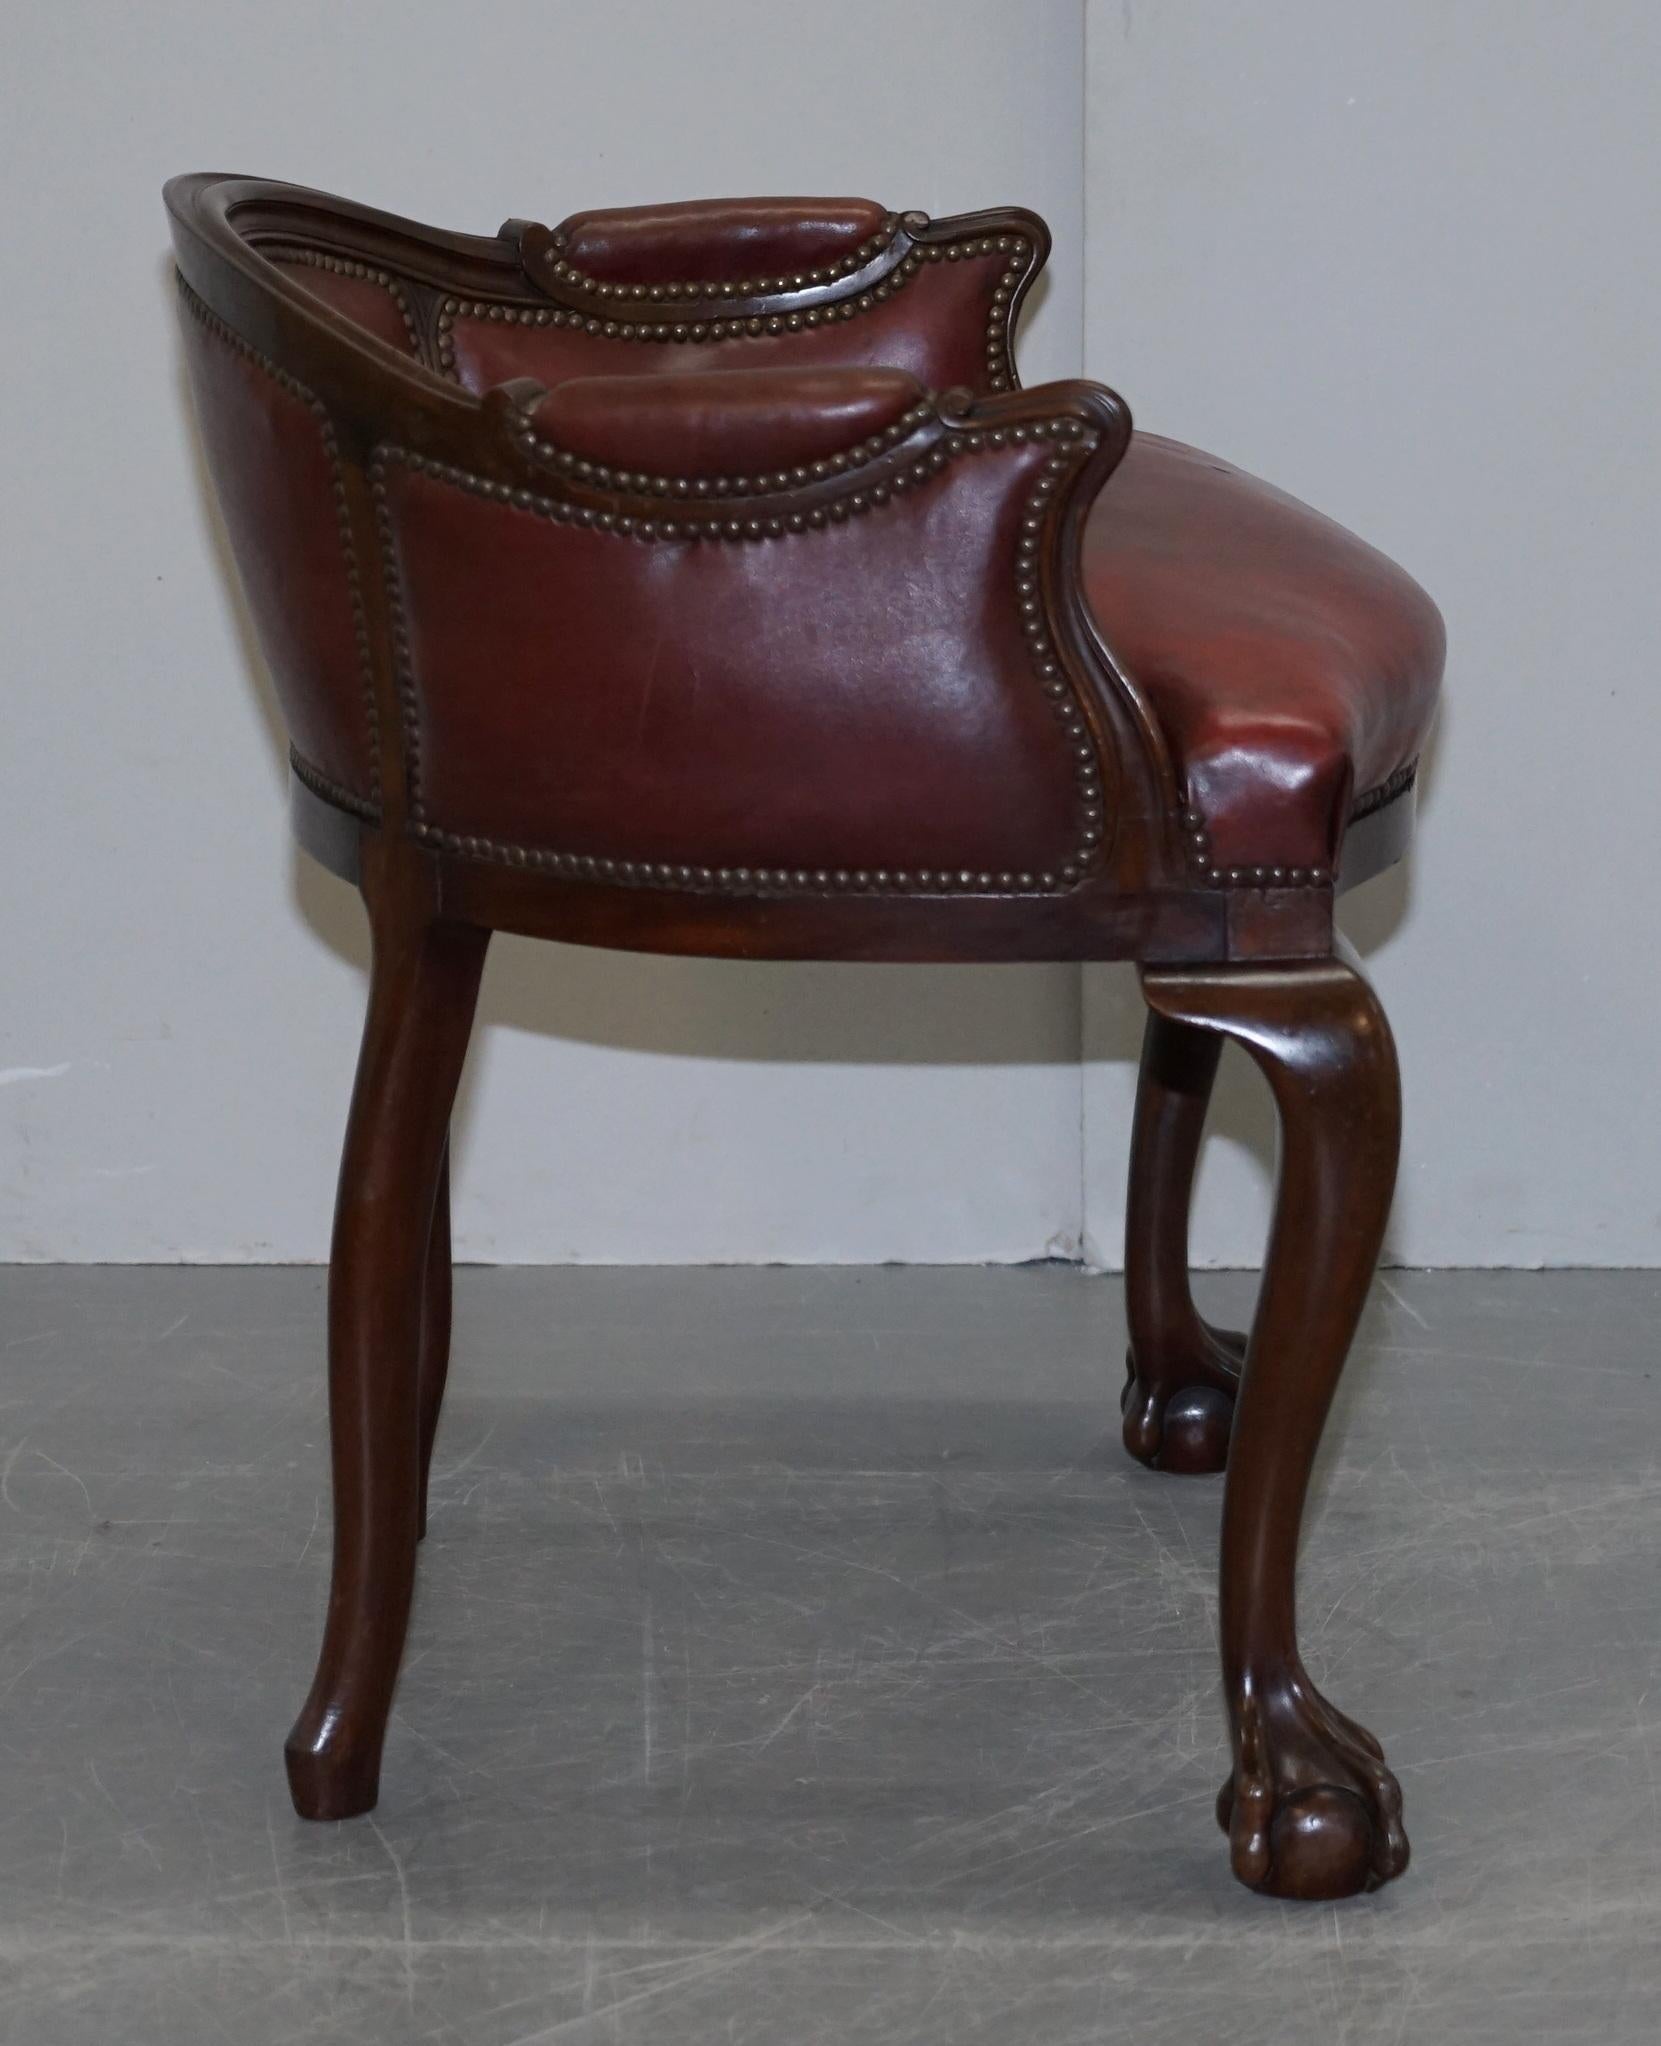 Claw & Ball Cabriolet Leg Oxblood Leather Small Chair or Stool Office or Desk 1